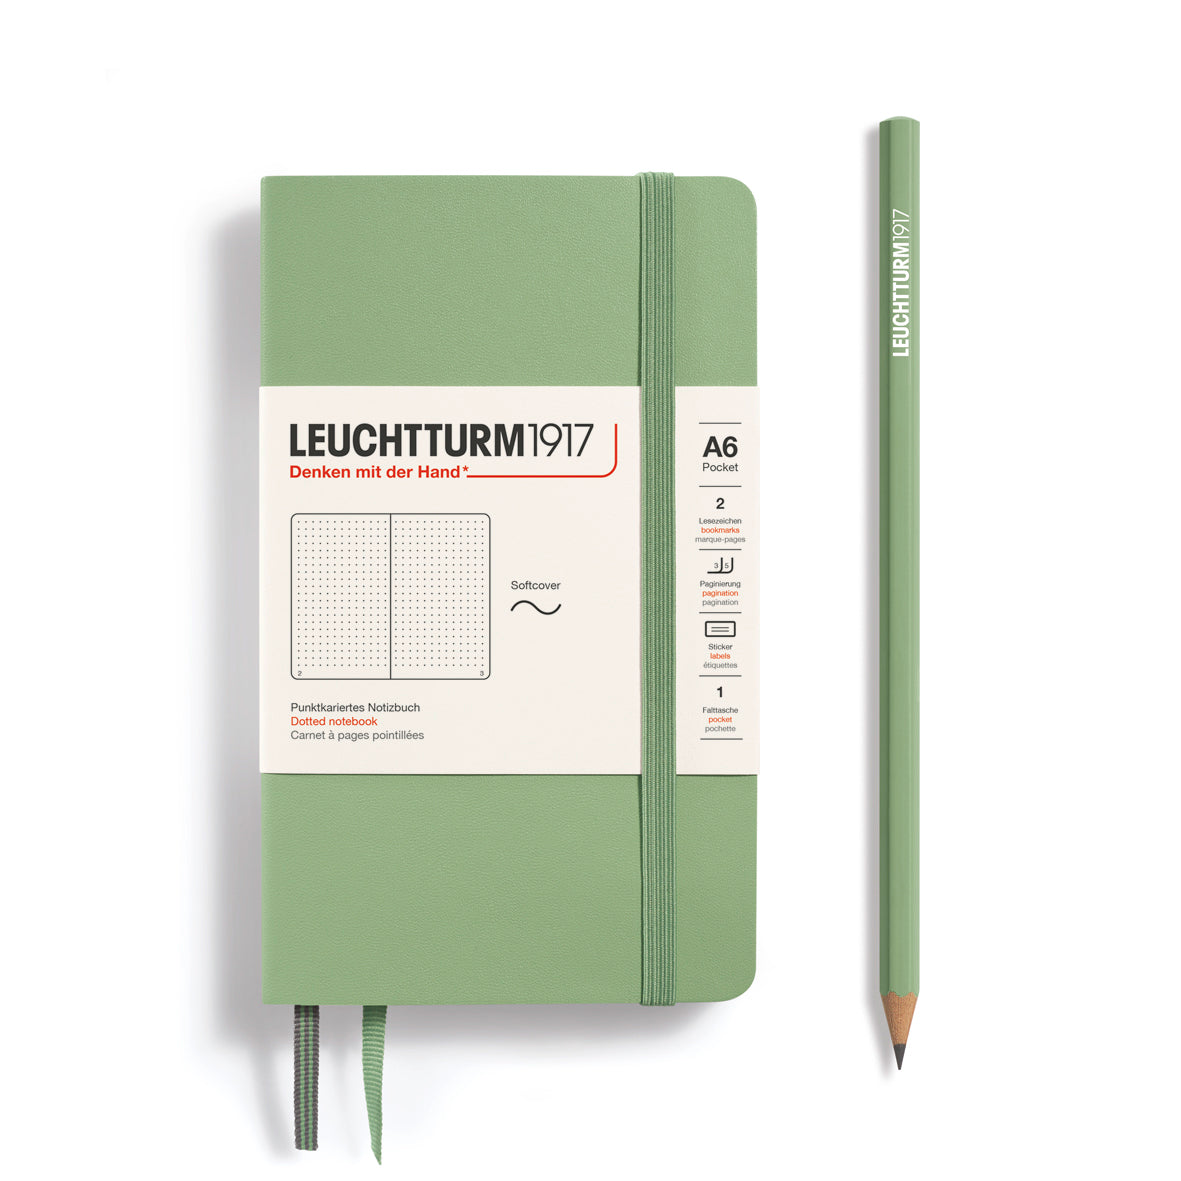 LEUCHTTURM1917 Notebook A6 Pocket Softcover in sage green and dotted inside at Penny Black